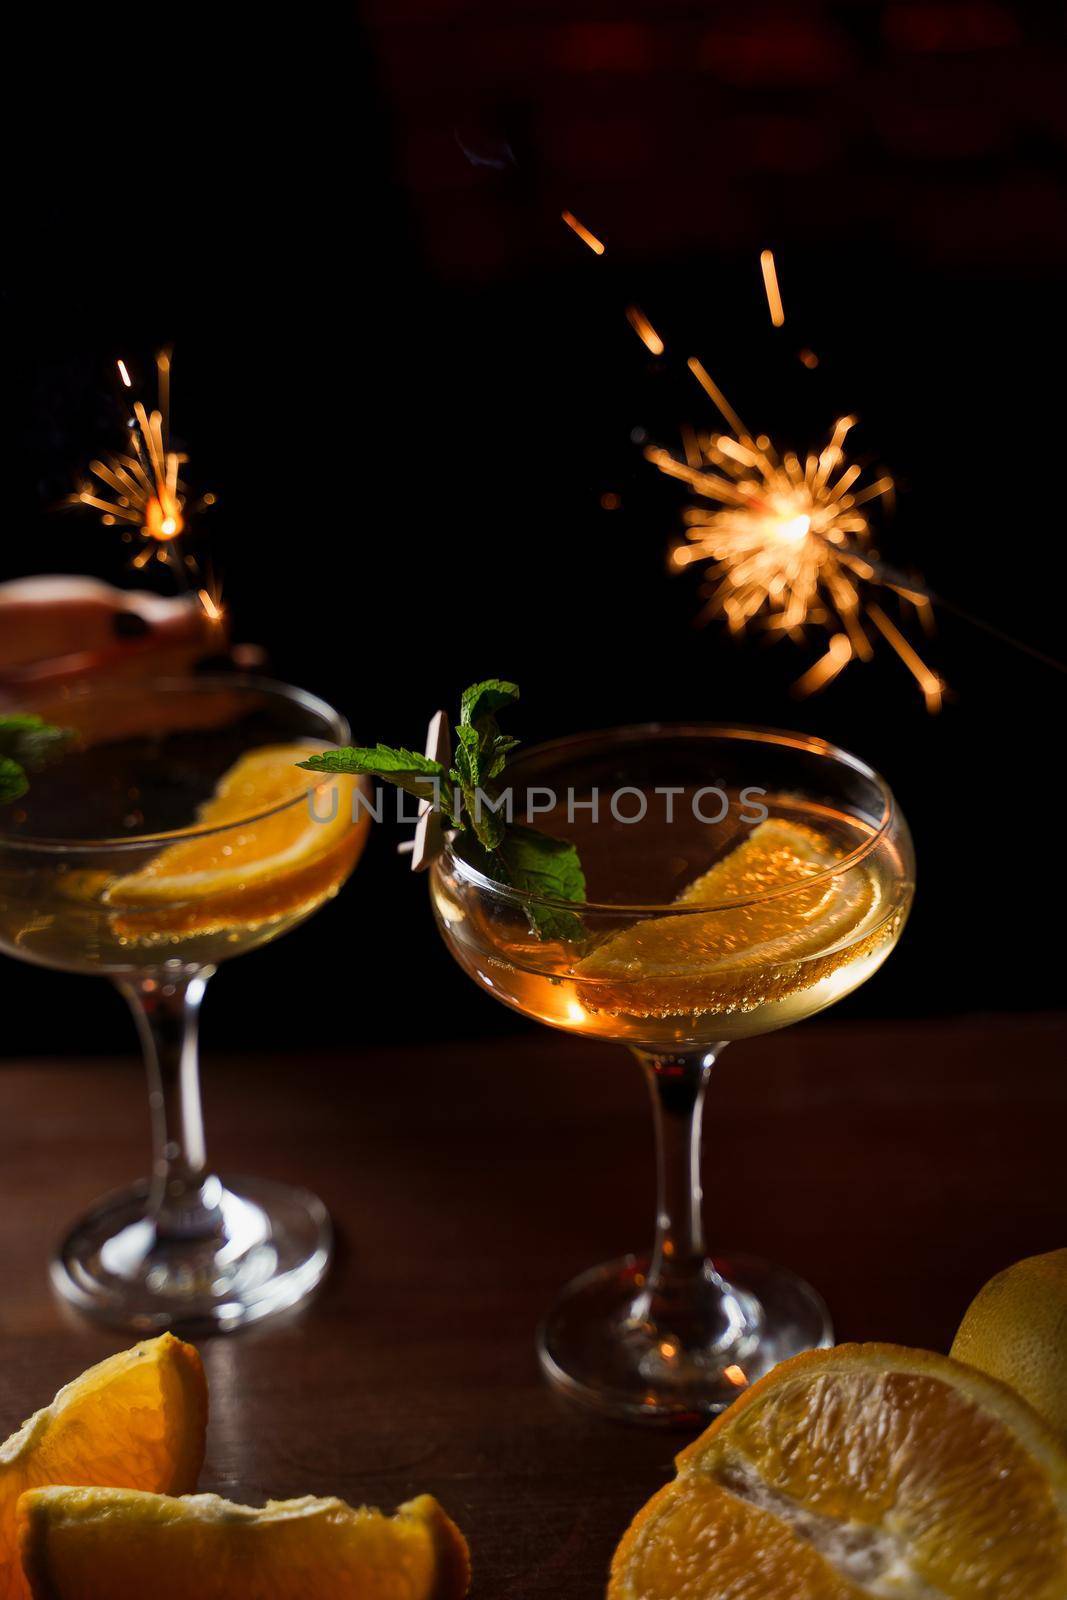 Celebrating new year eve 2022 with sparklers fireworks and drinking cocktails. Mint with orange slice in a cocktail glass filled with alcohol cocktails.